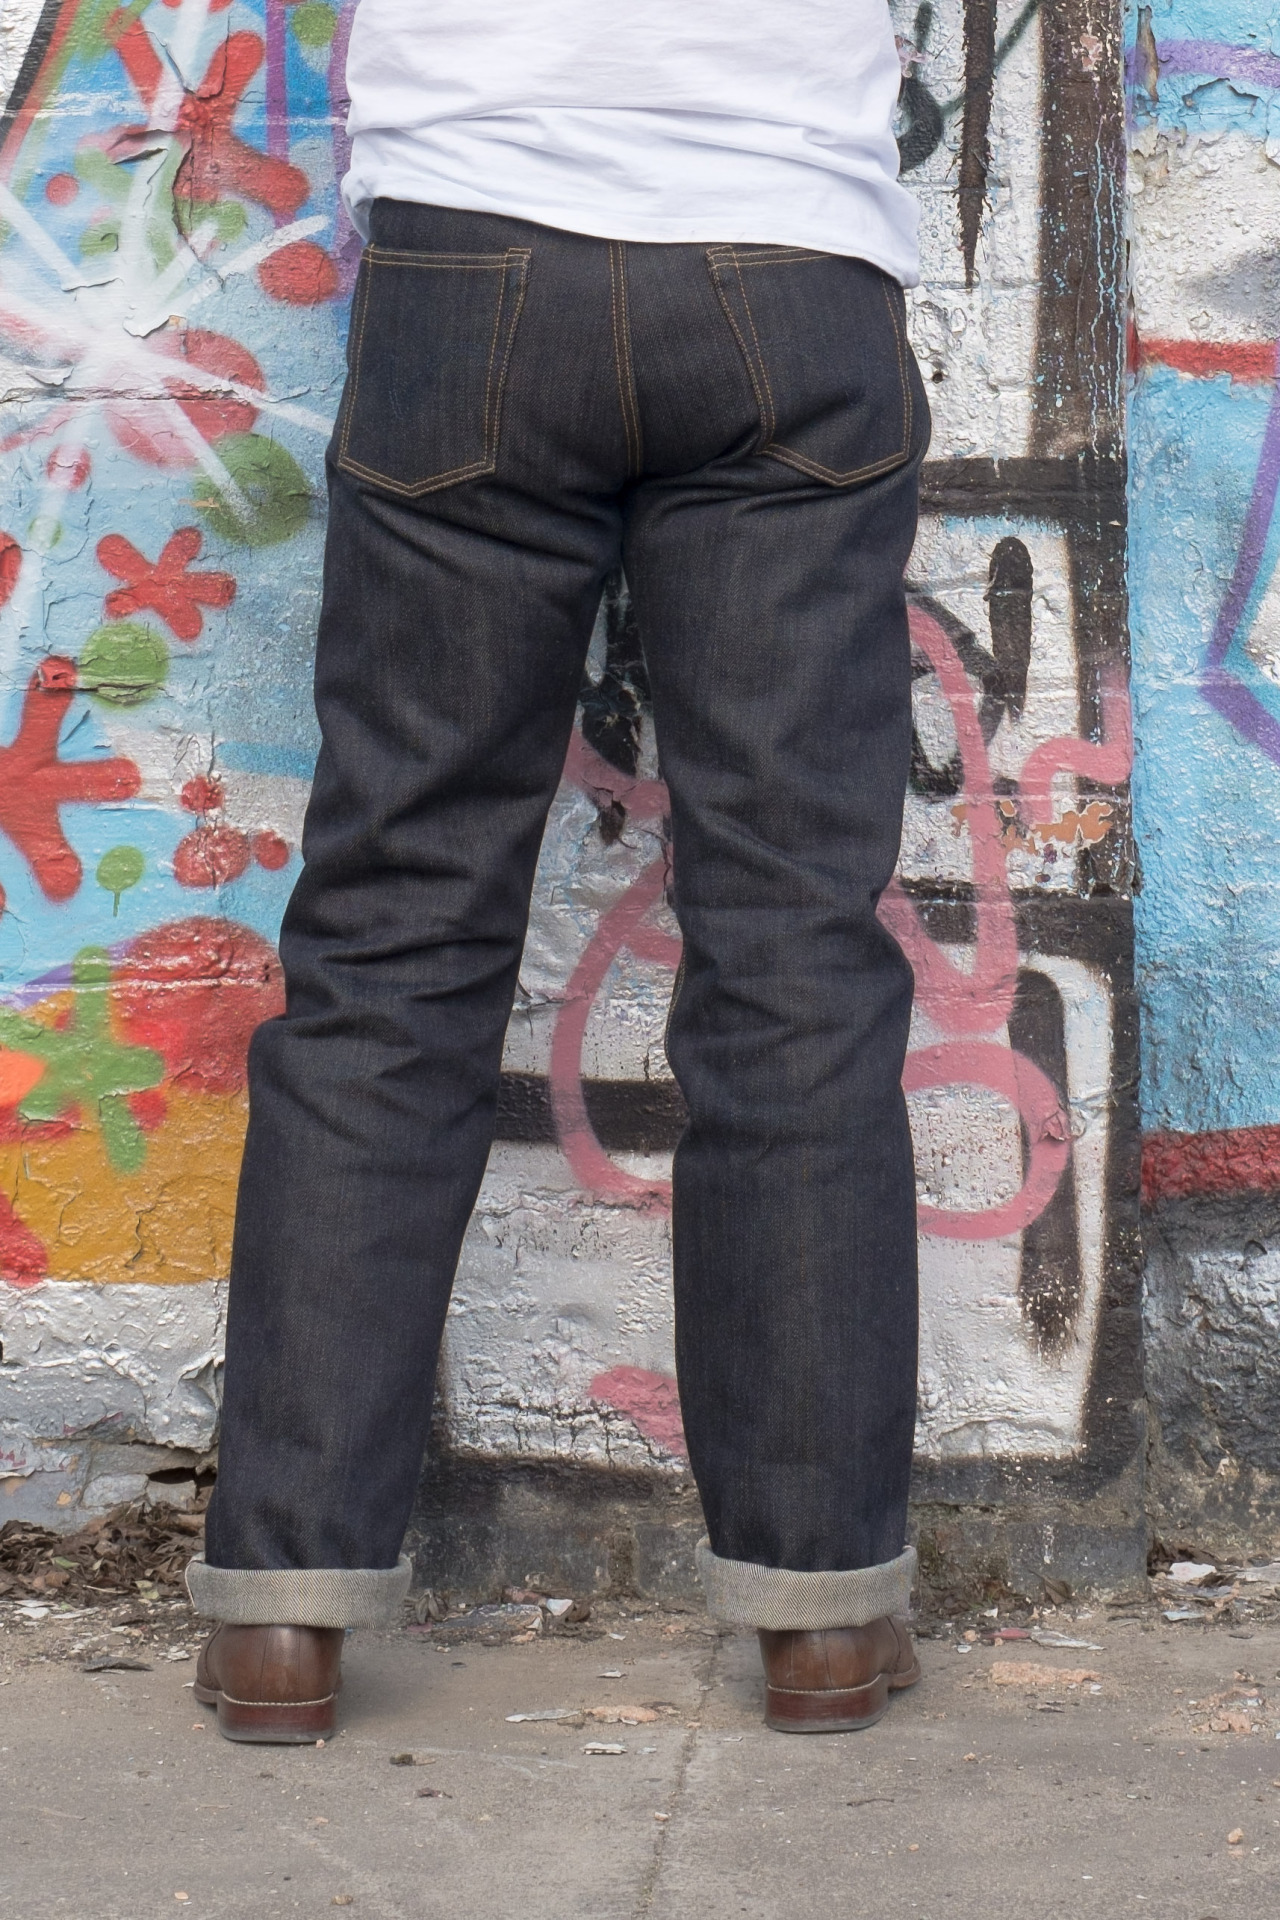 HWDC2 - Pictures Only Thread - Page 3 - superdenim - superfuture ...